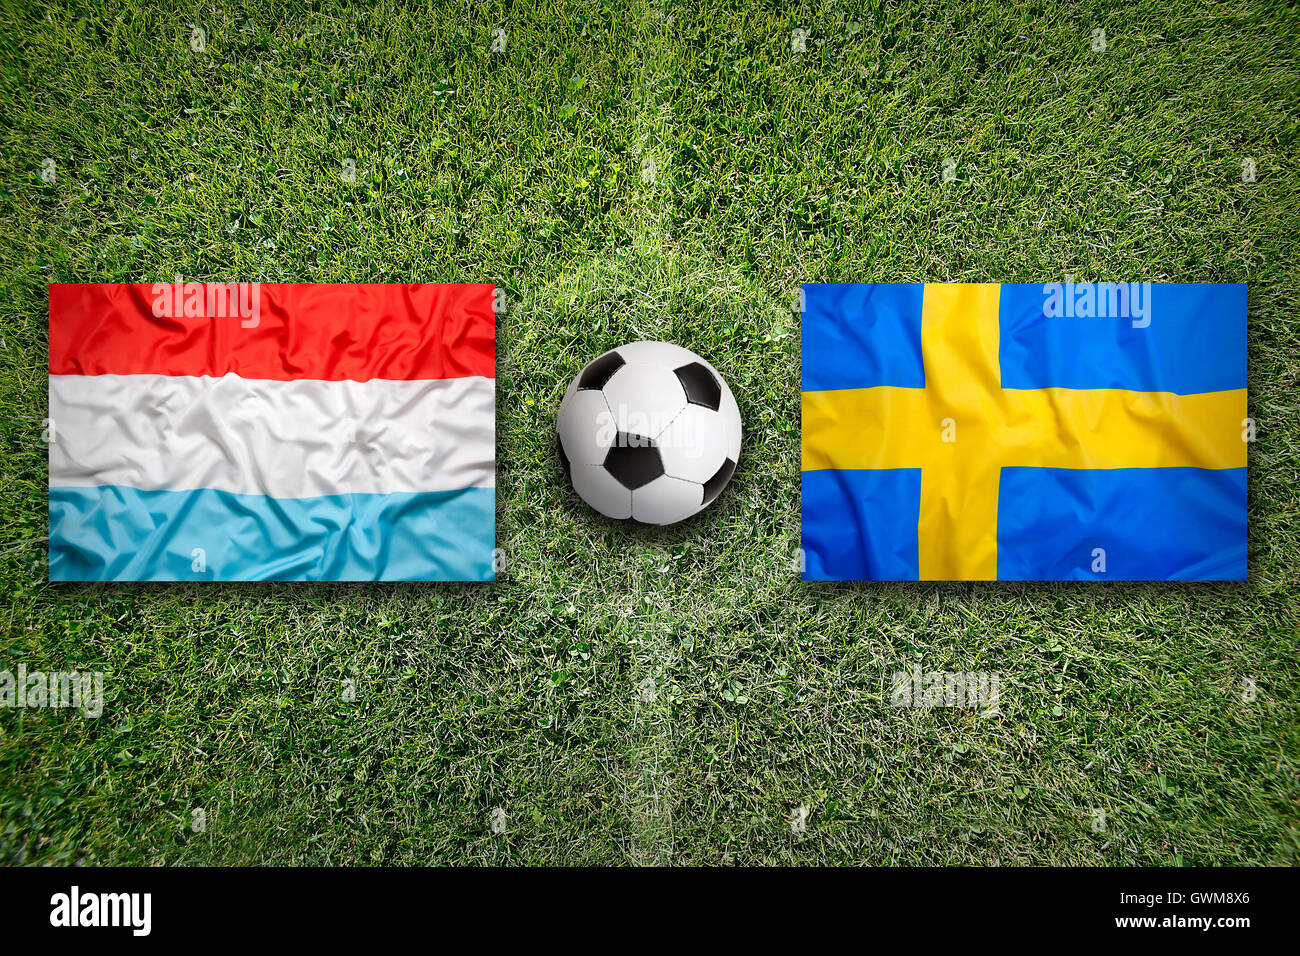 Luxembourg and Sweden flags on a green soccer field Stock Photo